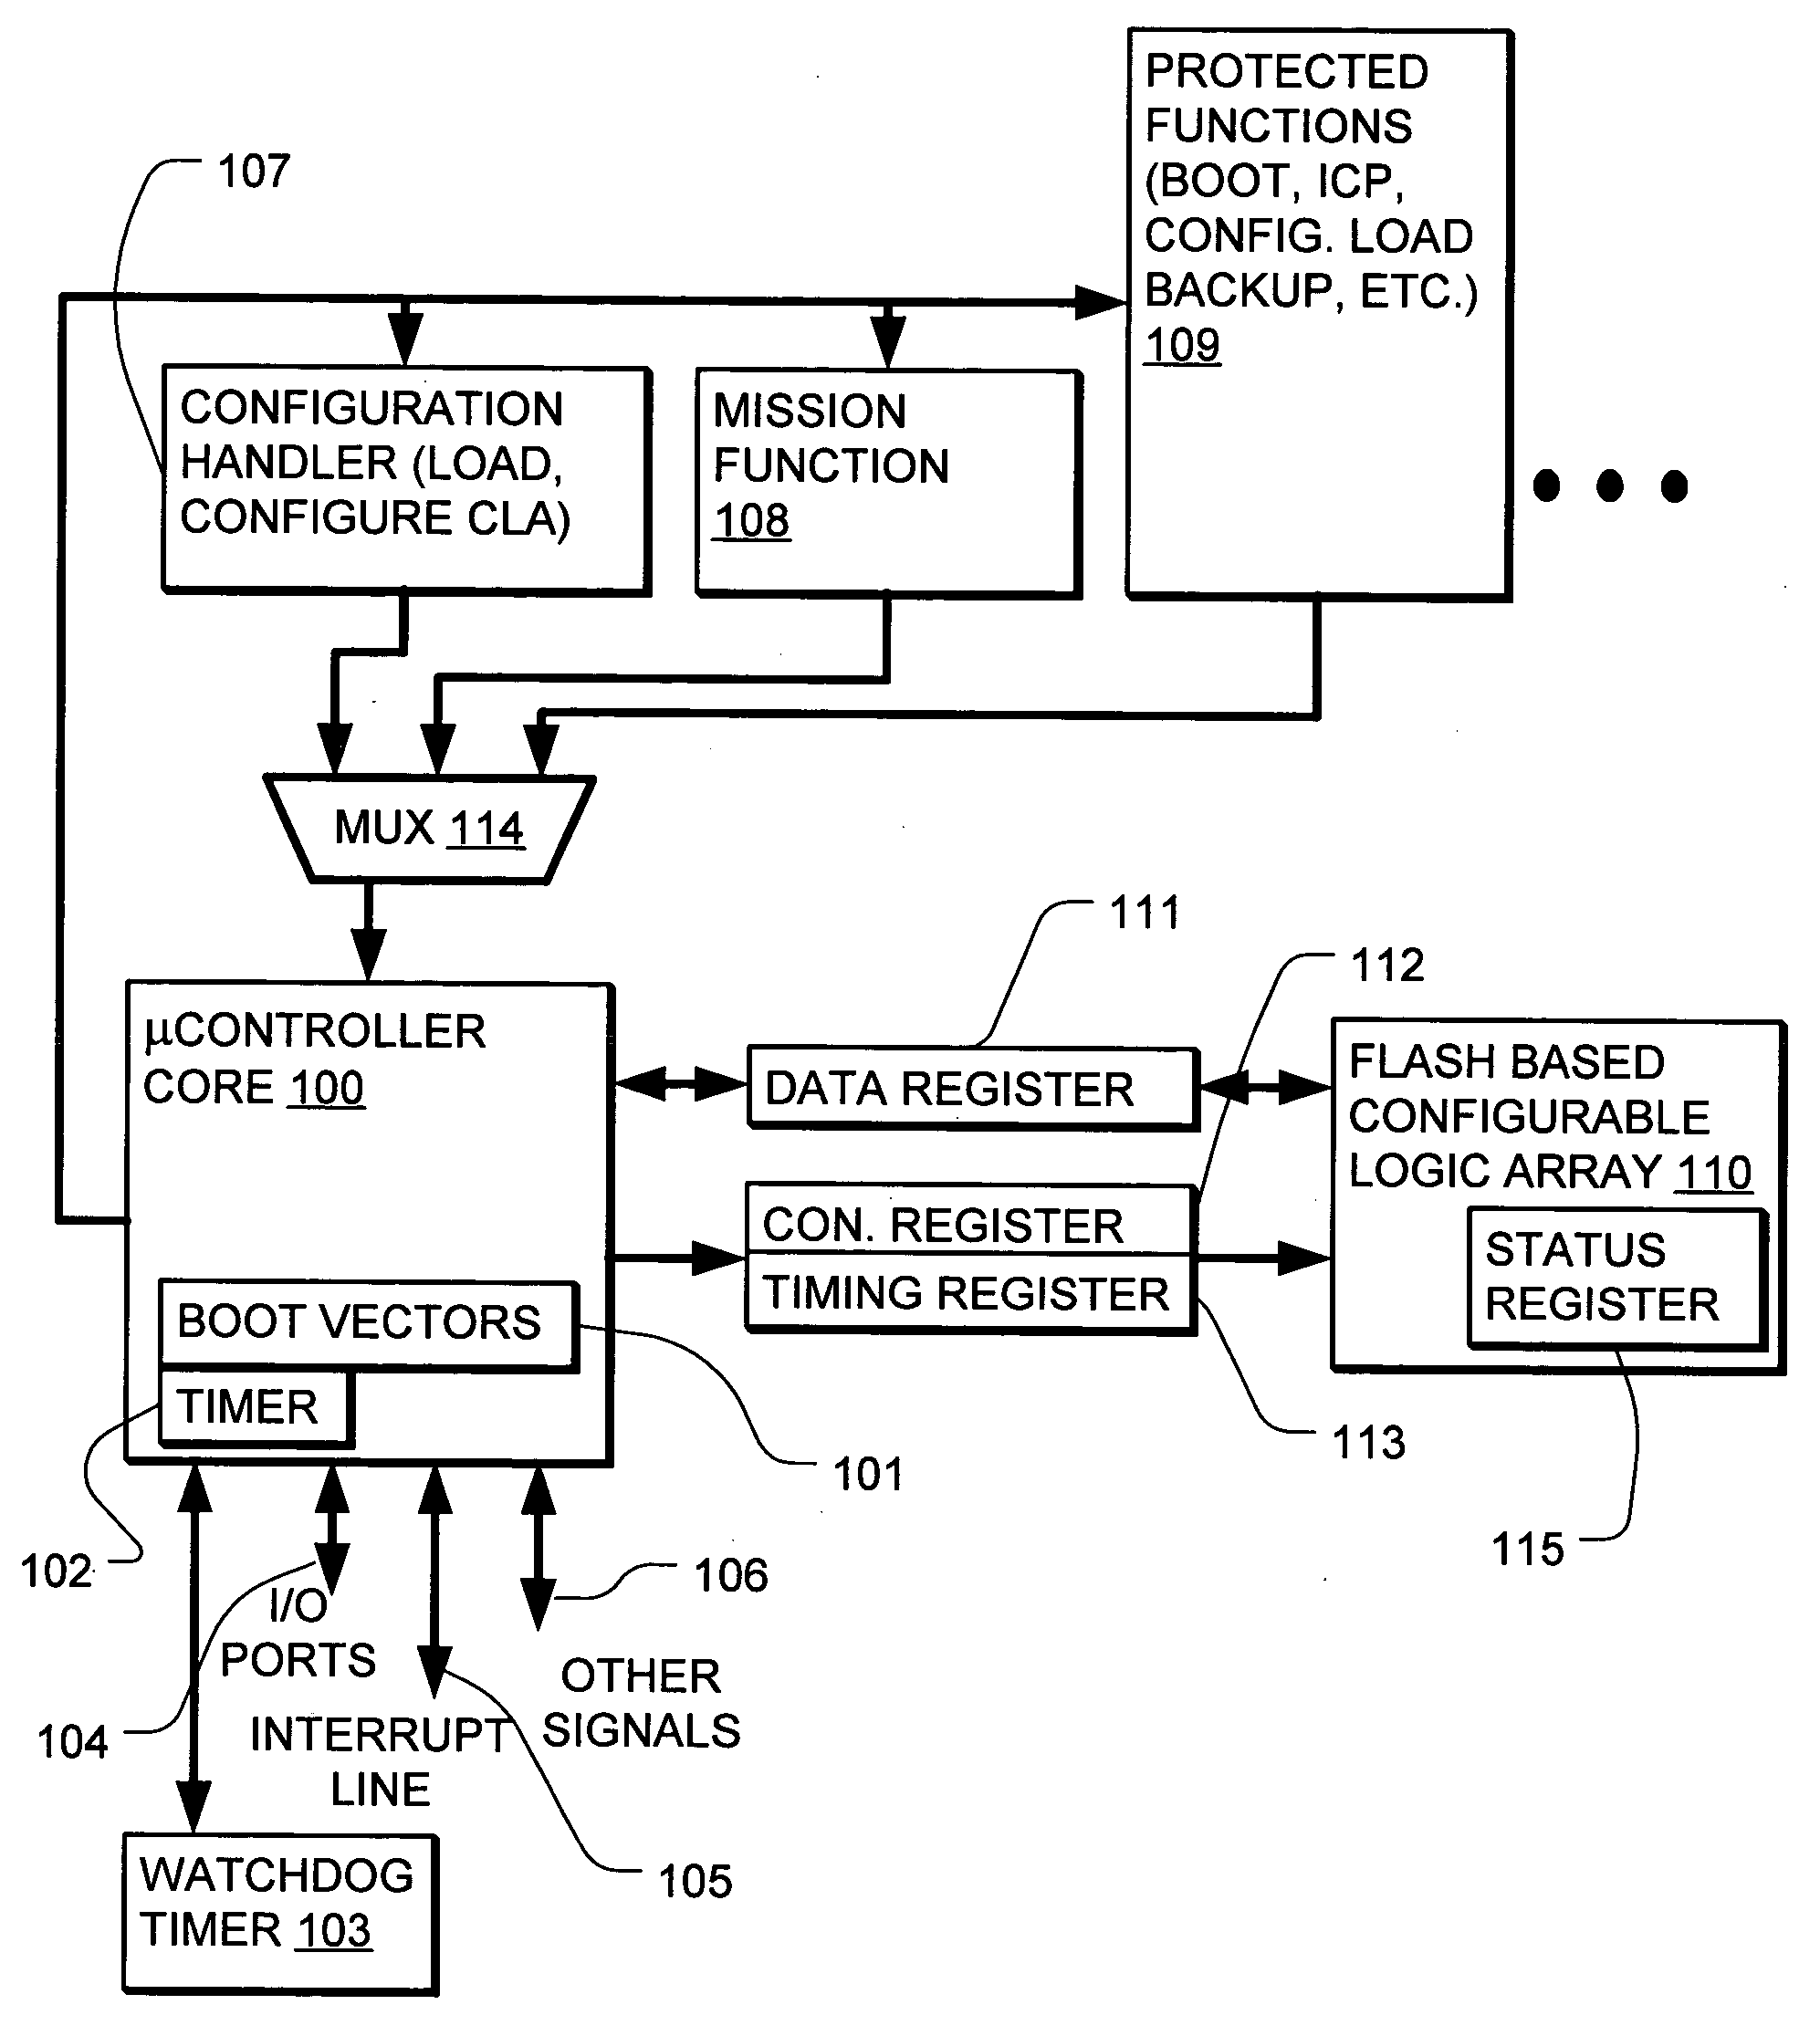 In-circuit configuration architecture for embedded configurable logic array